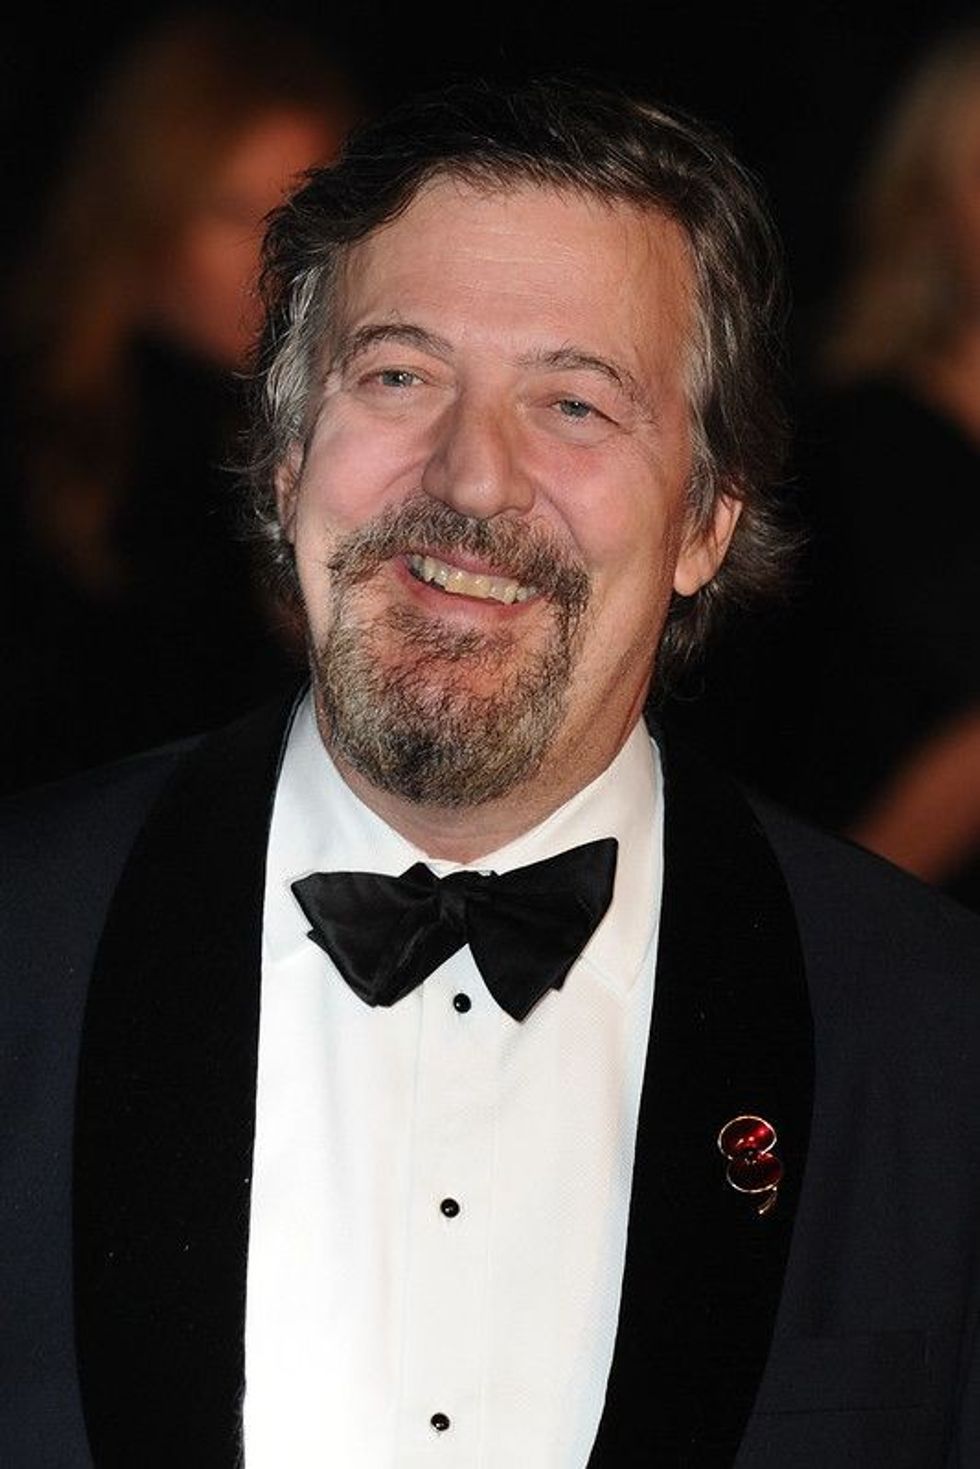 Candid picture of Stephen Fry from an event